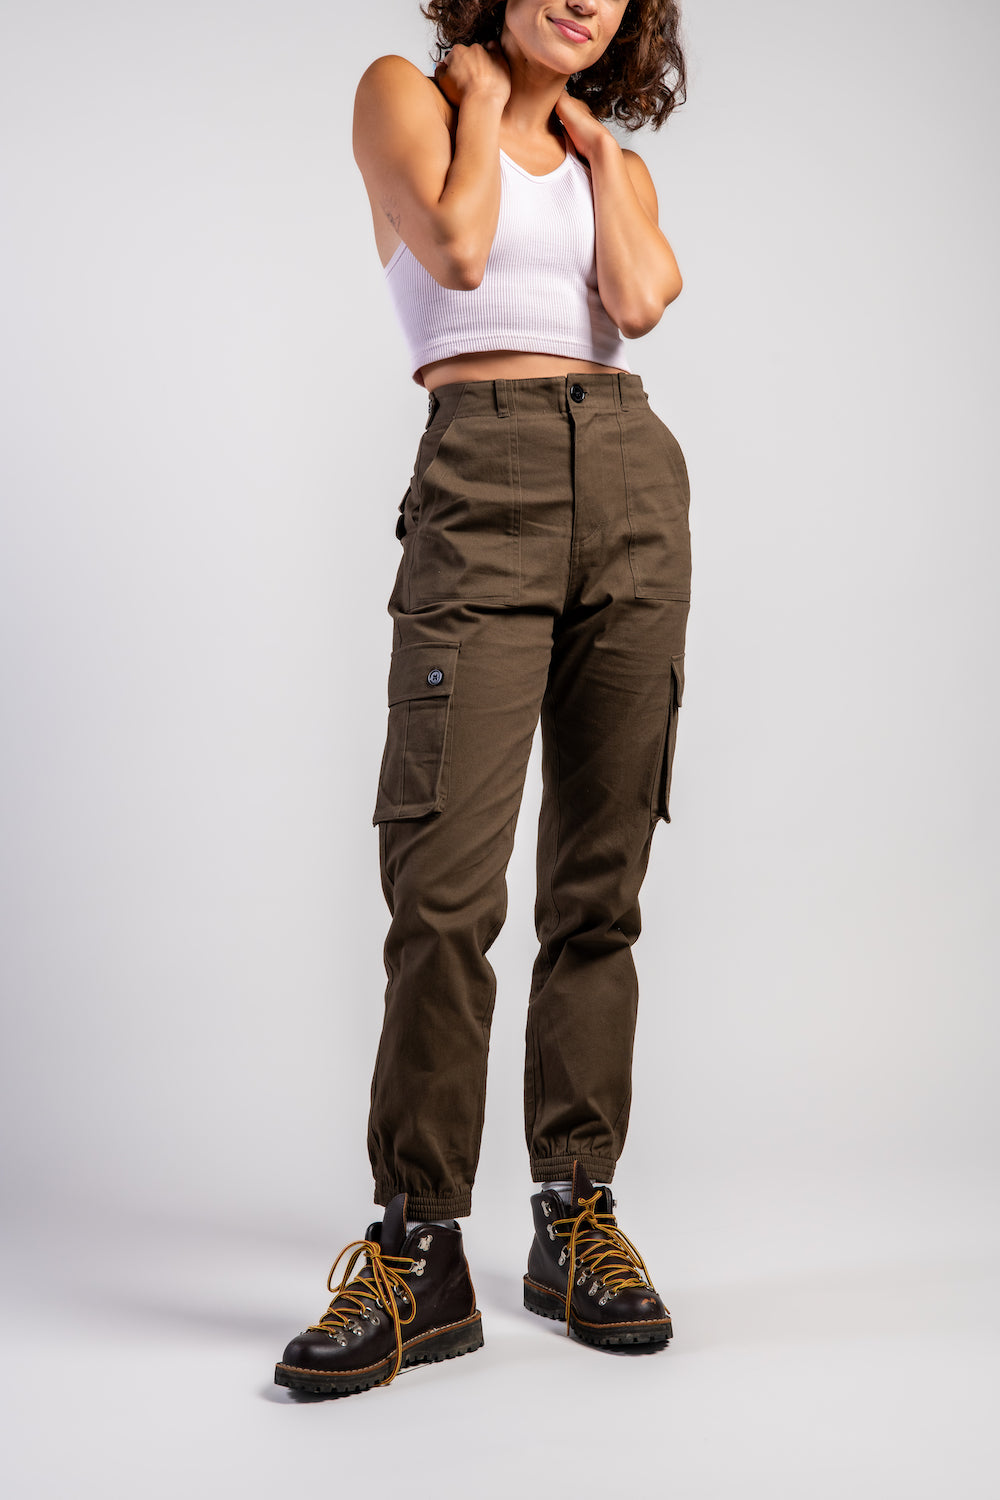 #color_brew _women in outdoor hiking pants and hiking boots